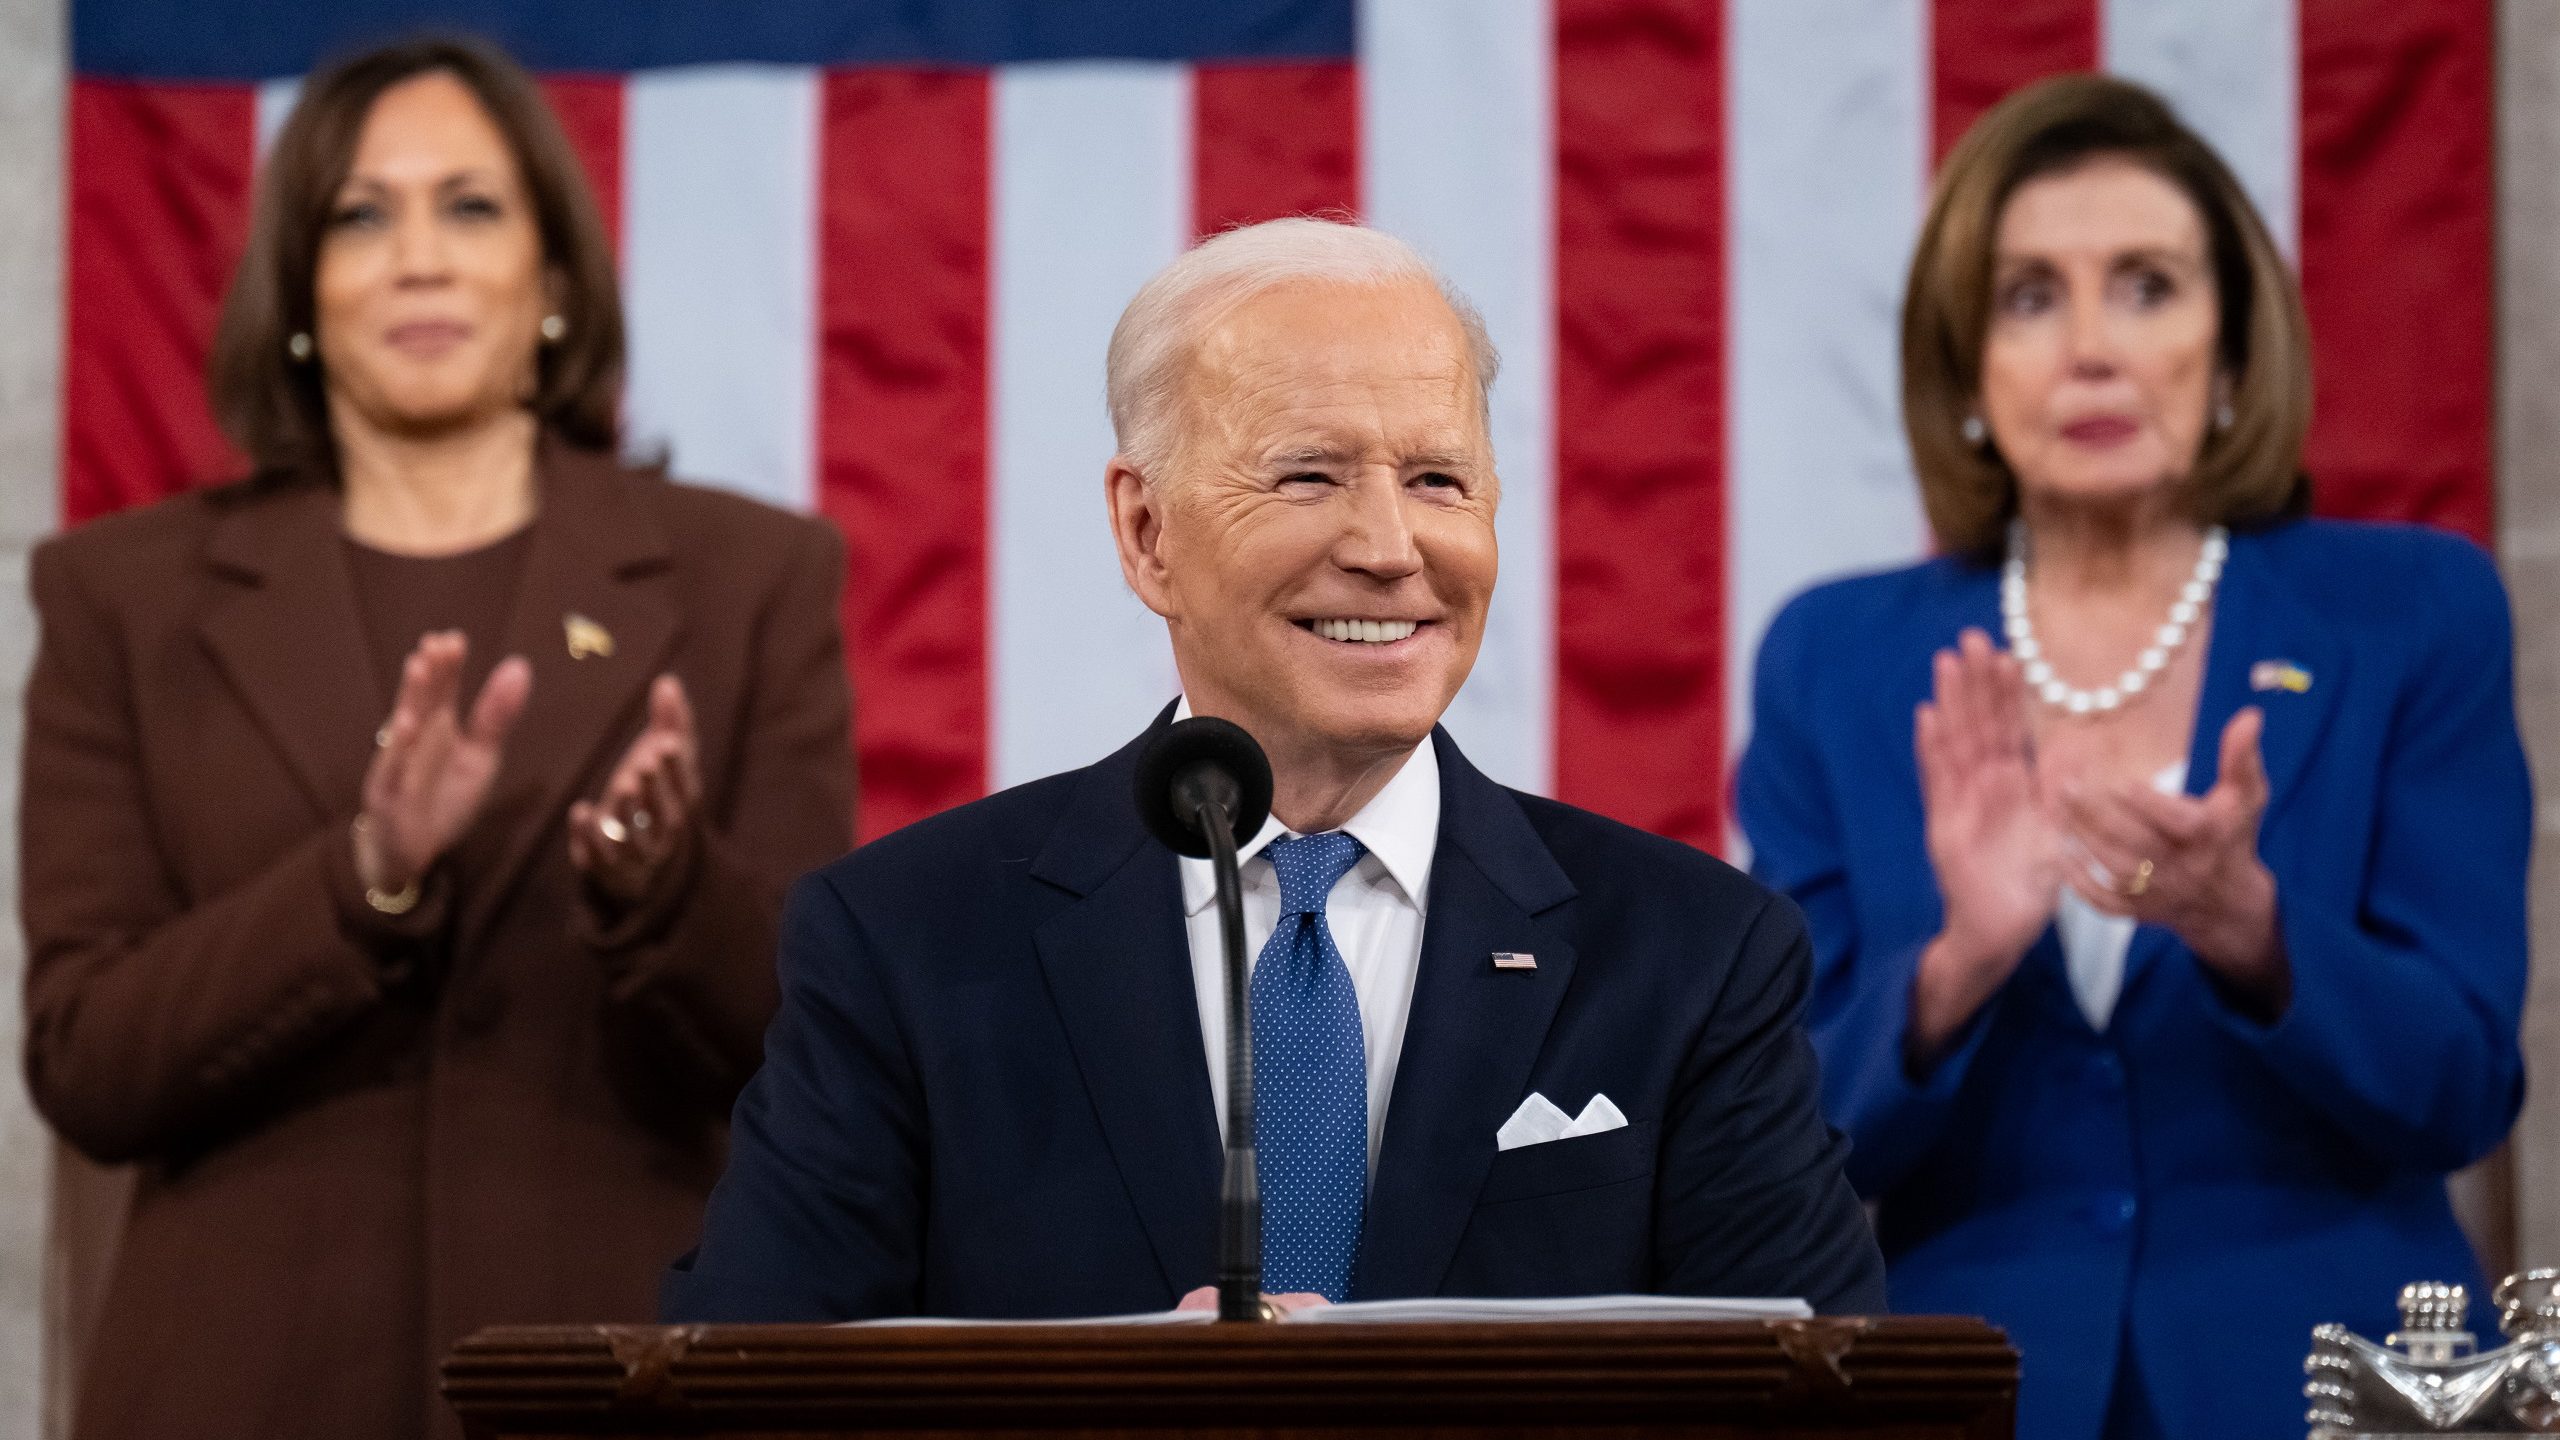 Biden Caught on Camera Saying Iran Nuclear Deal is ‘Dead’